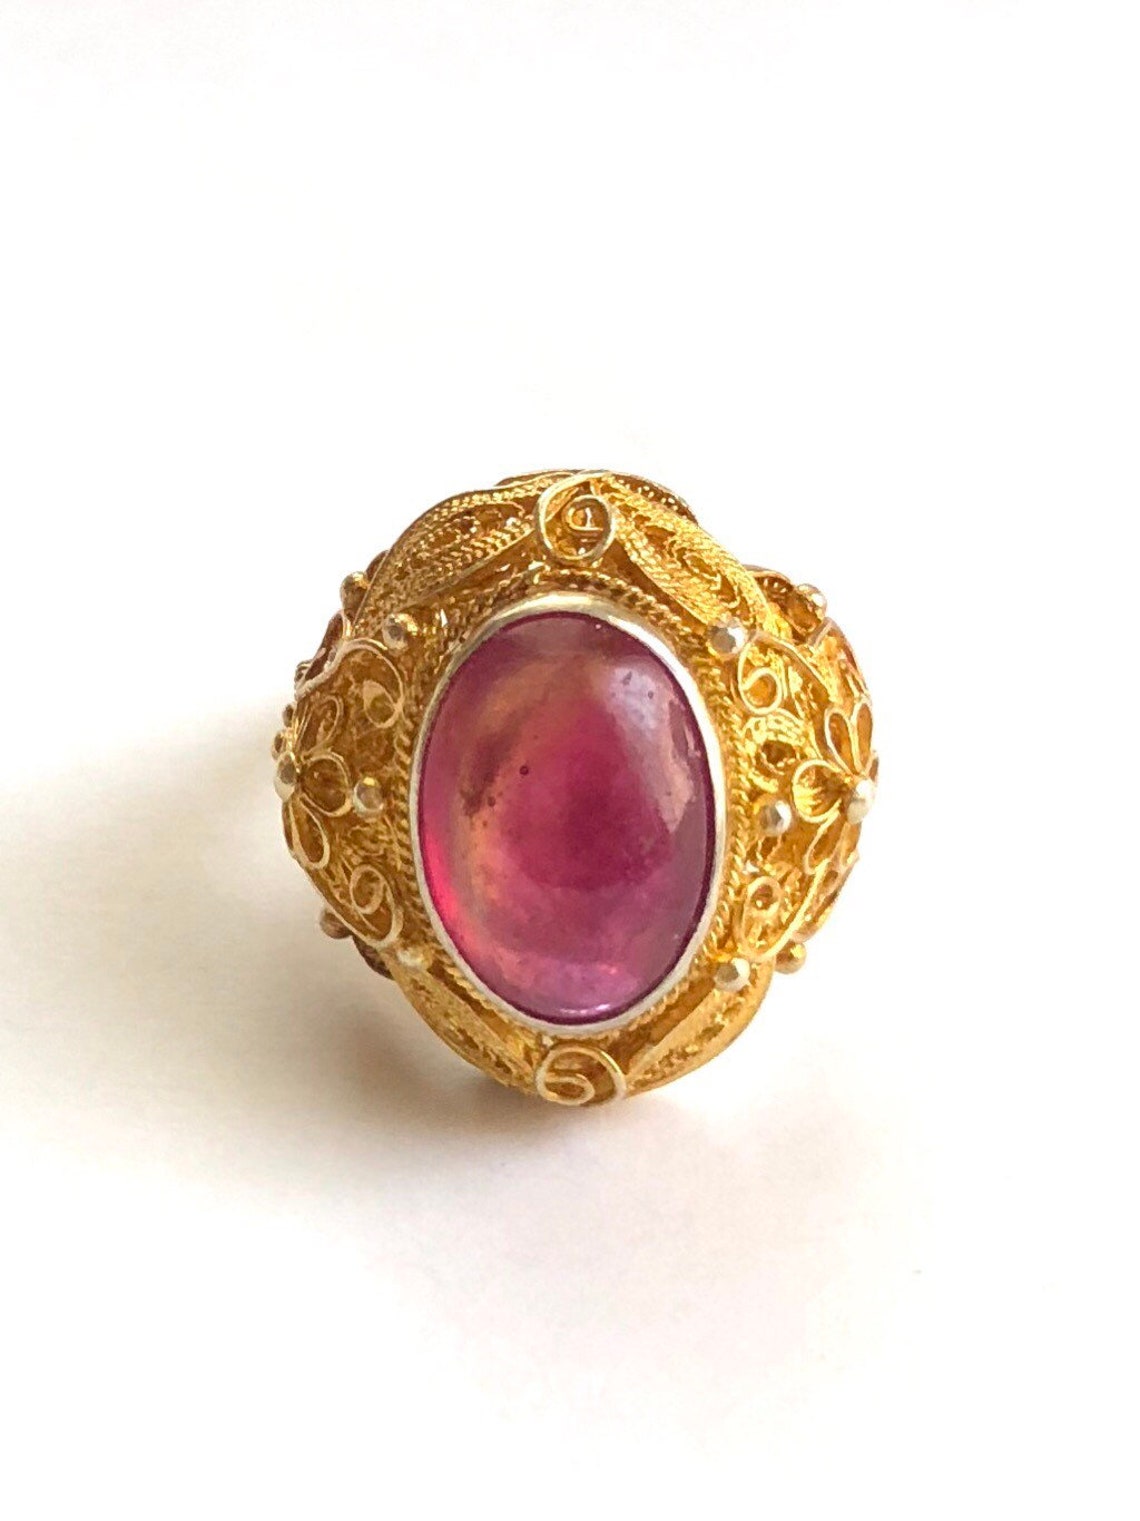 Ruby Ring Vintage Oval Shaped Ruby Filigree Gold-Plated | Etsy